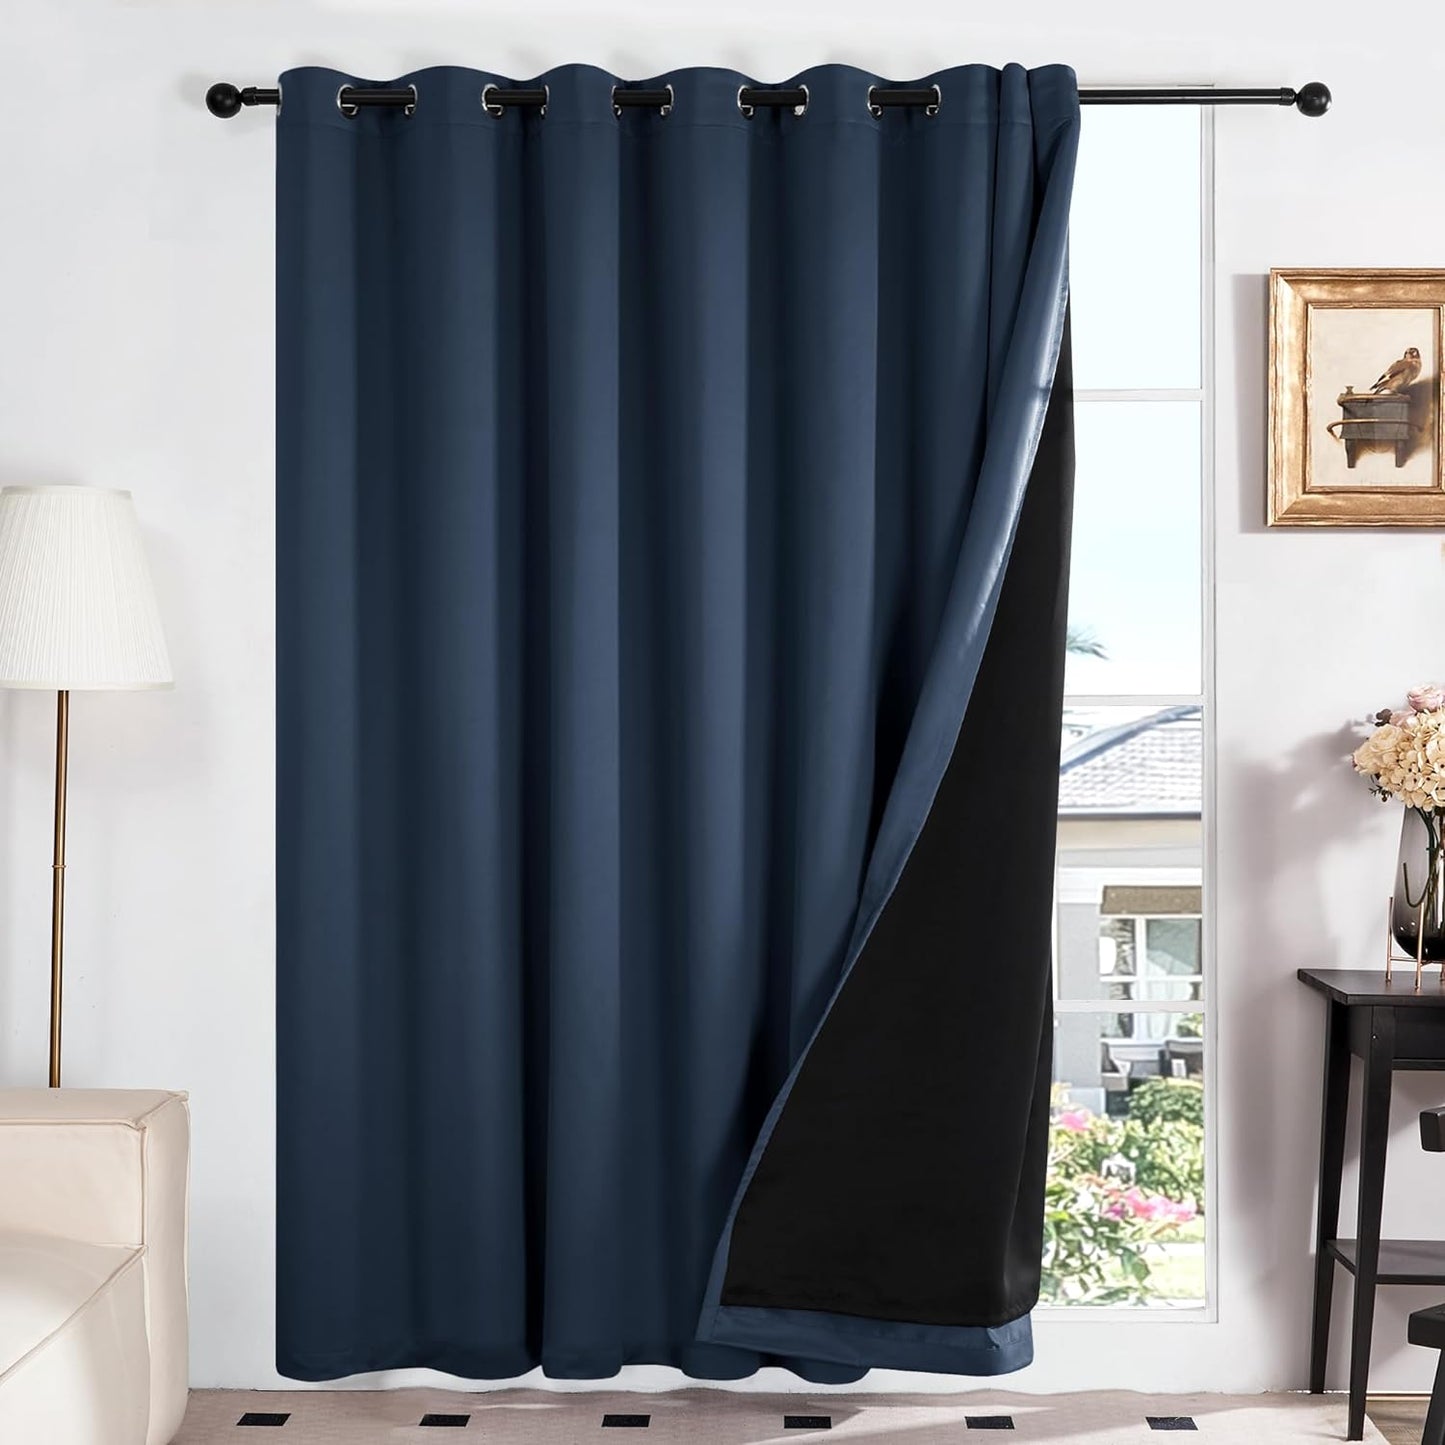 Deconovo 100% White Blackout Curtains, Double Layer Sliding Door Curtain for Living Room, Extra Wide Room Divder Curtains for Patio Door (100W X 84L Inches, Pure White, 1 Panel)  DECONOVO Navy 100W X 95L Inch 